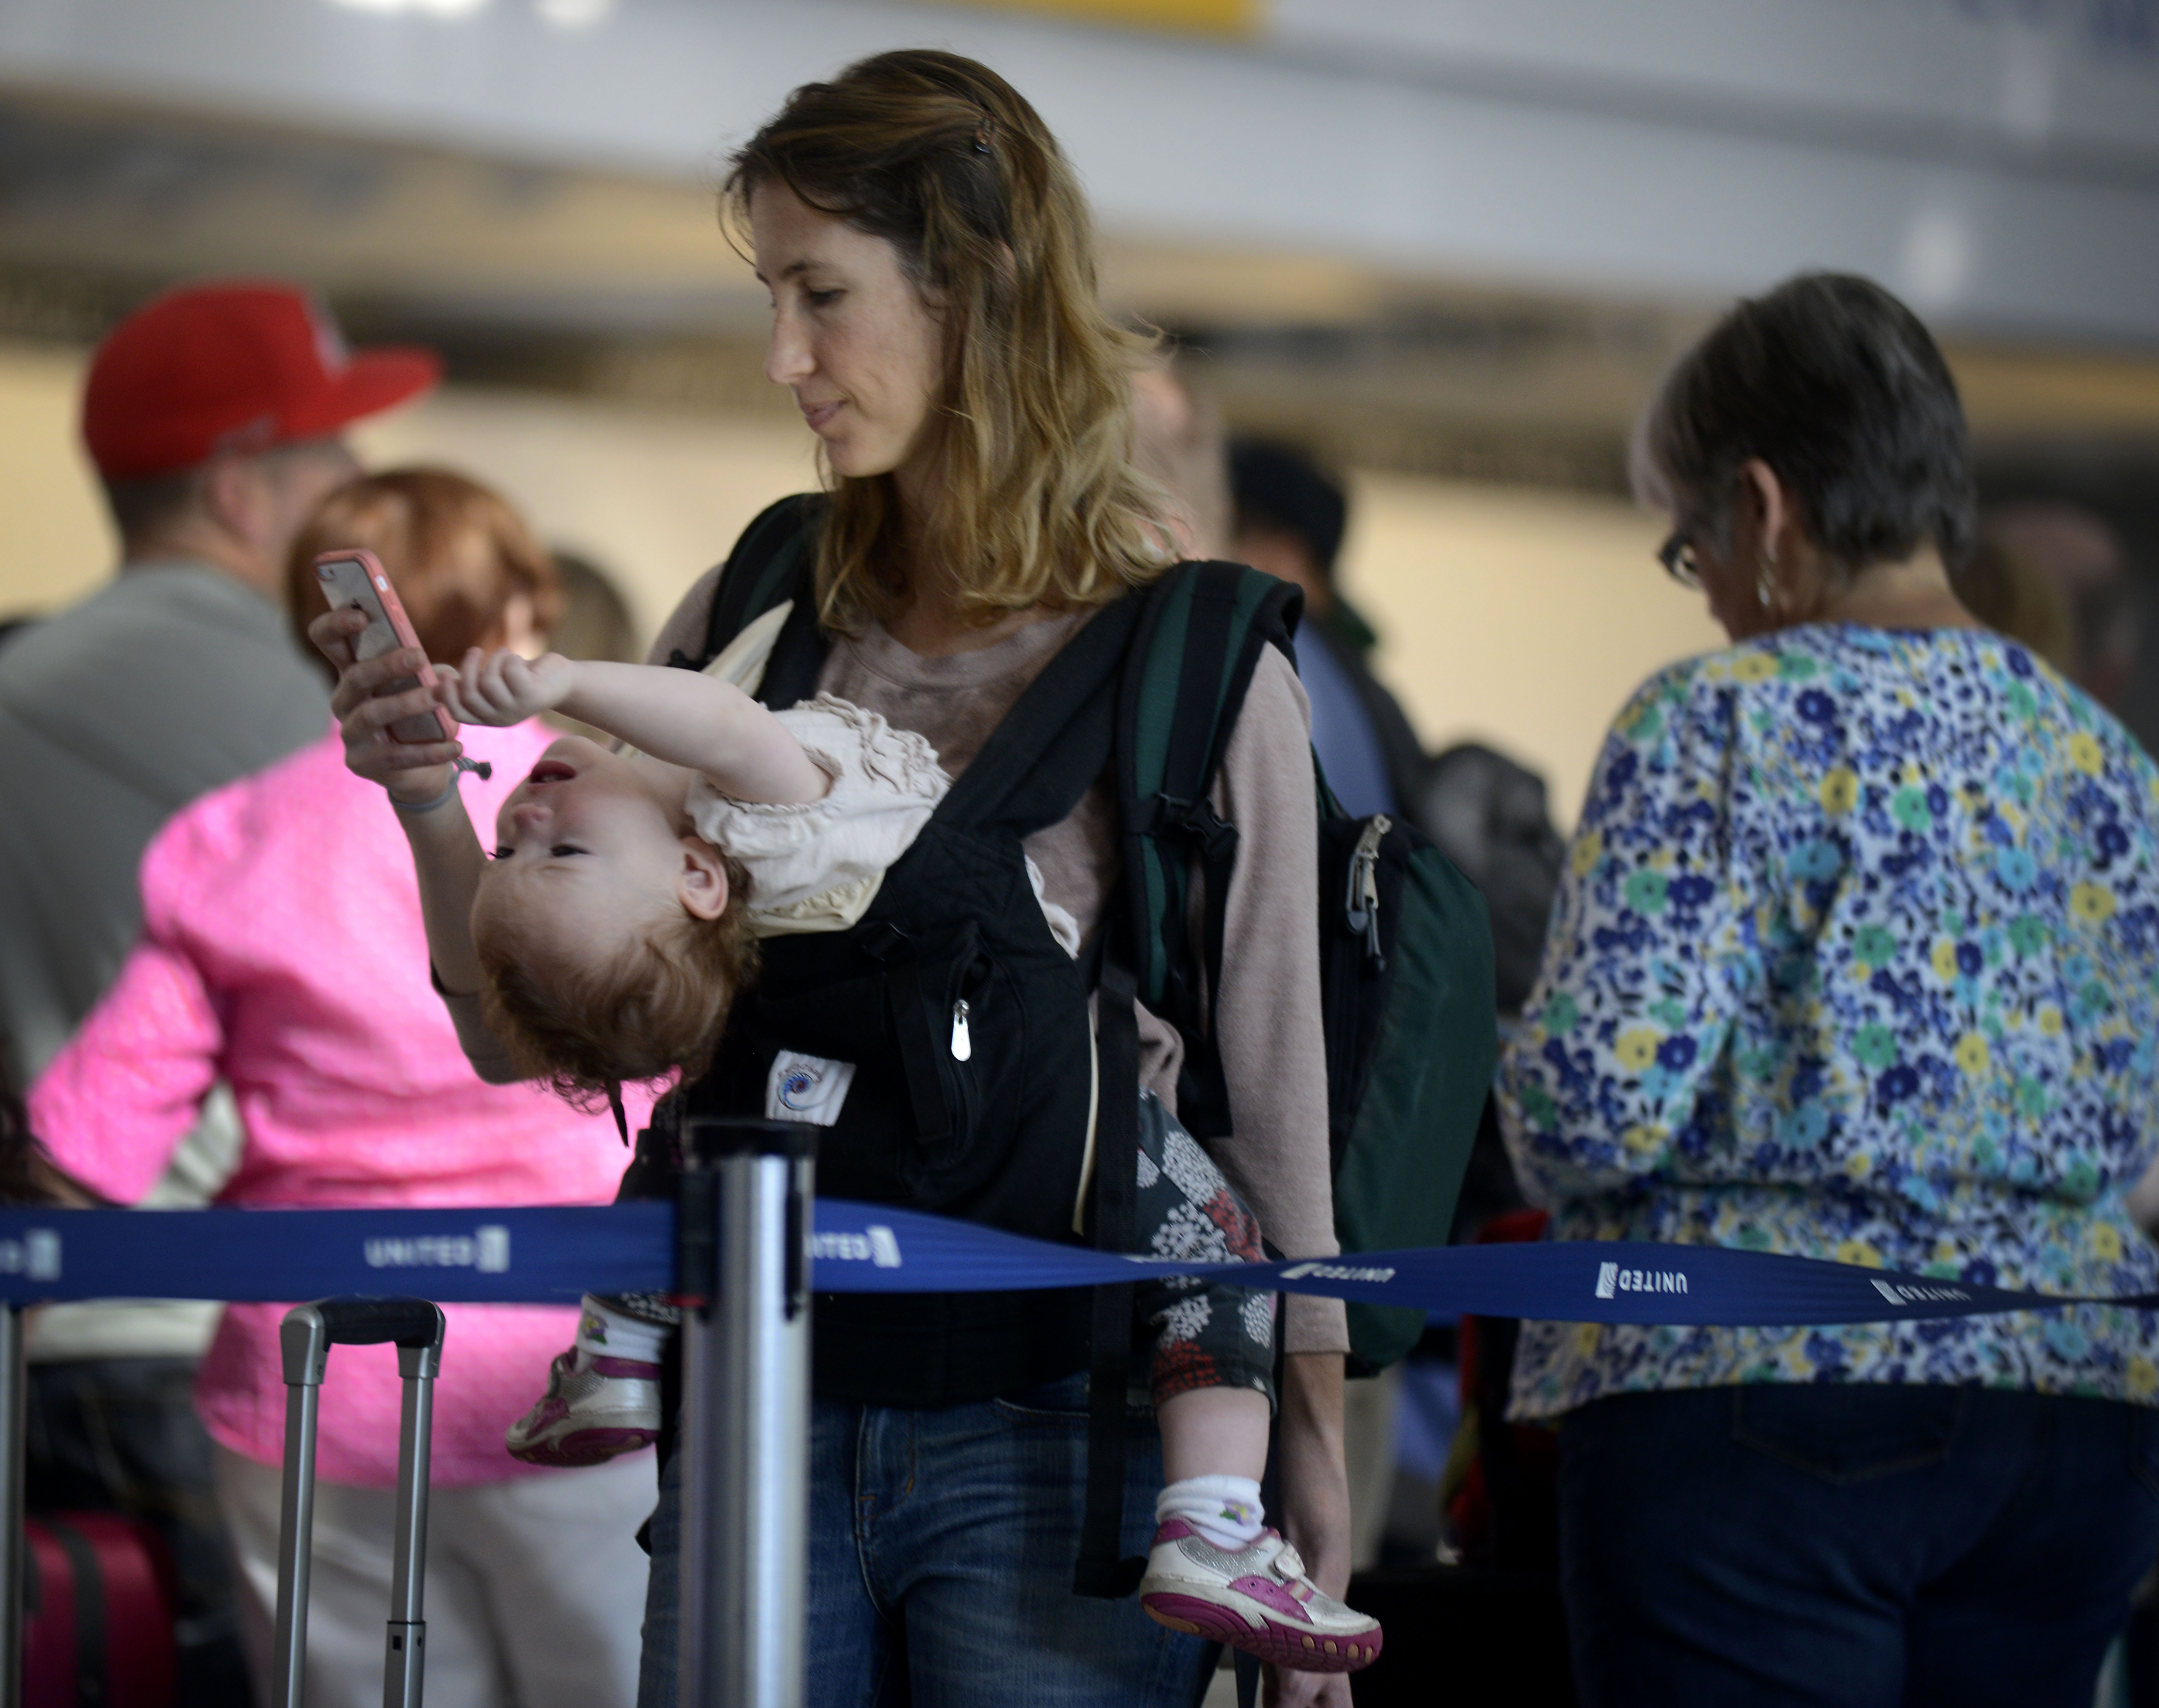 Ann Walden checks her phone as 15 month-old daughter Delphine plays while waiting in-line after their flight to Baton Rouge was delayed at O'Hare International Airport in Chicago, Friday, Sept. 26, 2014. All flights in and out of Chicago's two airports were halted Friday after a fire at a suburban air traffic control facility sent delays and cancellations rippling through the U.S. air travel network. Authorities said the blaze was intentionally set by a contract employee of the Federal Aviation Administration and had no ties to terrorism.   (AP Photo/Paul Beaty)